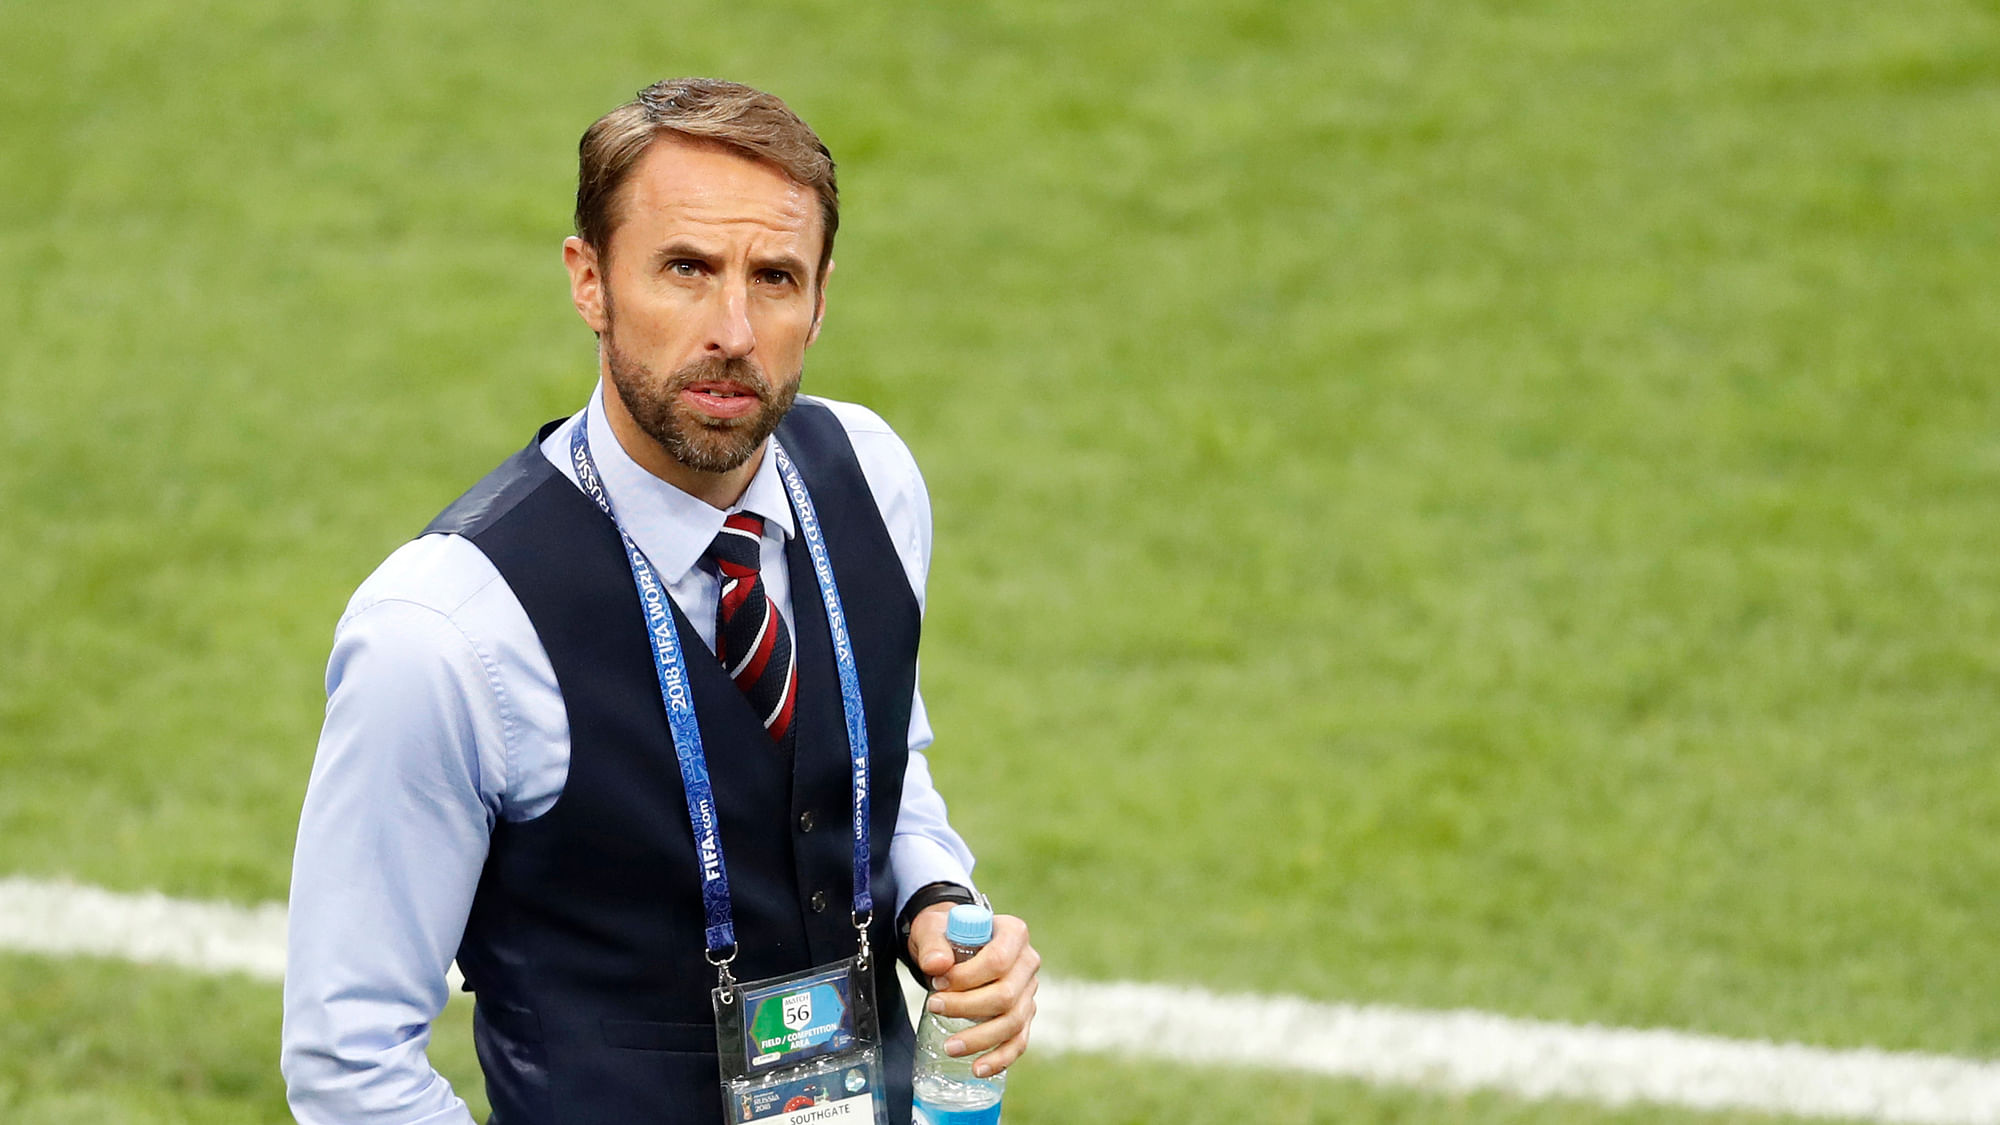 Gareth Southgate was appointed England’s coach two years back.